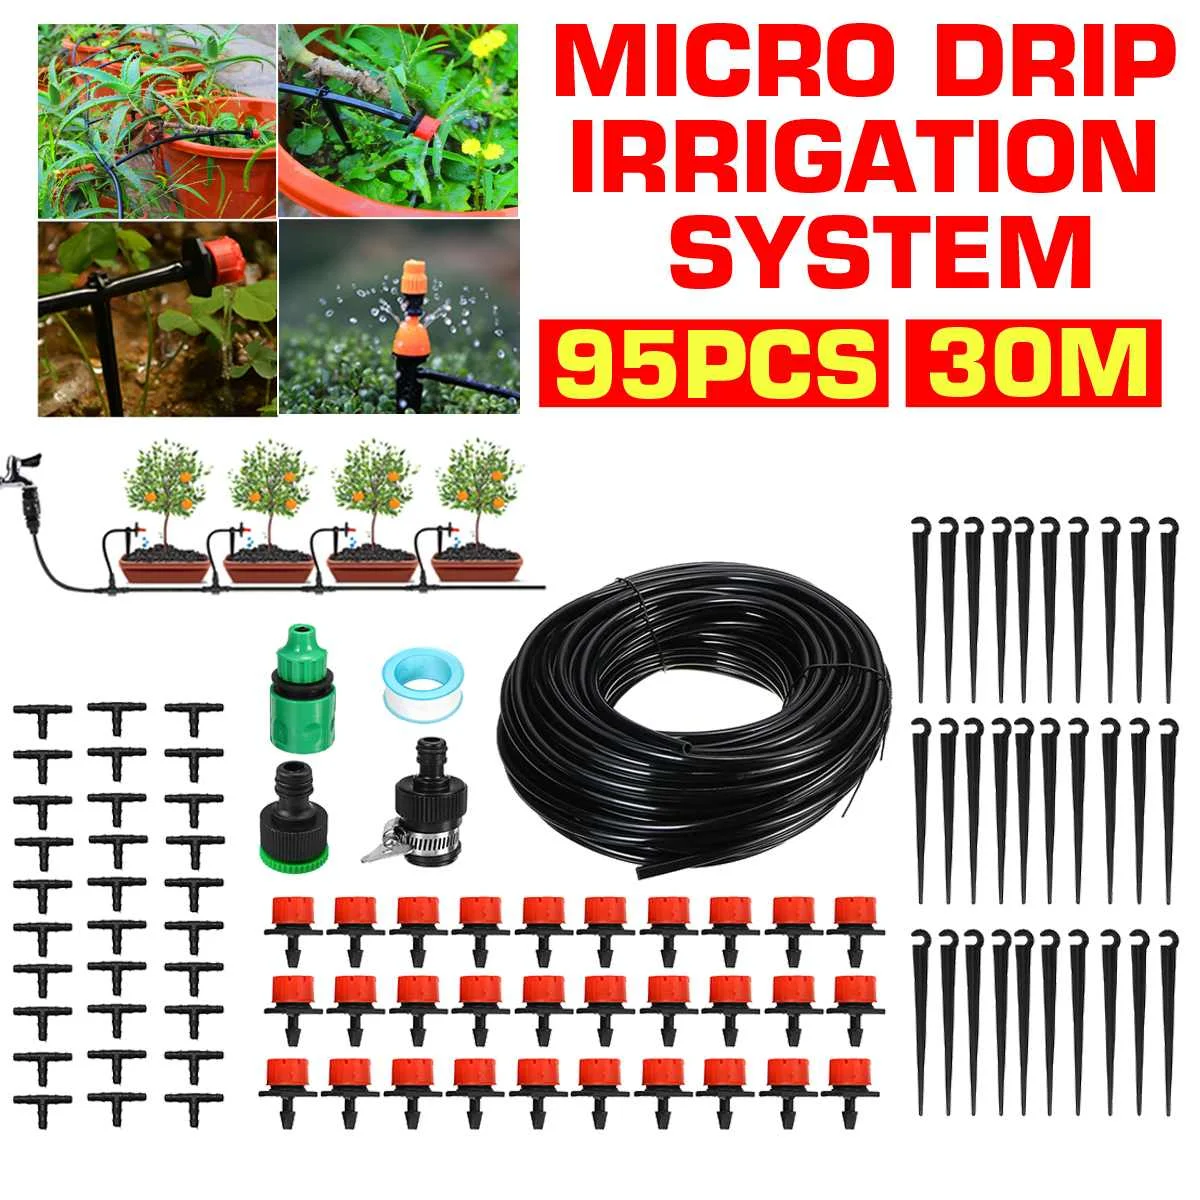 30m Automatic Garden Watering System Kits Self Garden Irrigation Watering Kits Micro Drip Mist Spray Cooling System Sprinkler